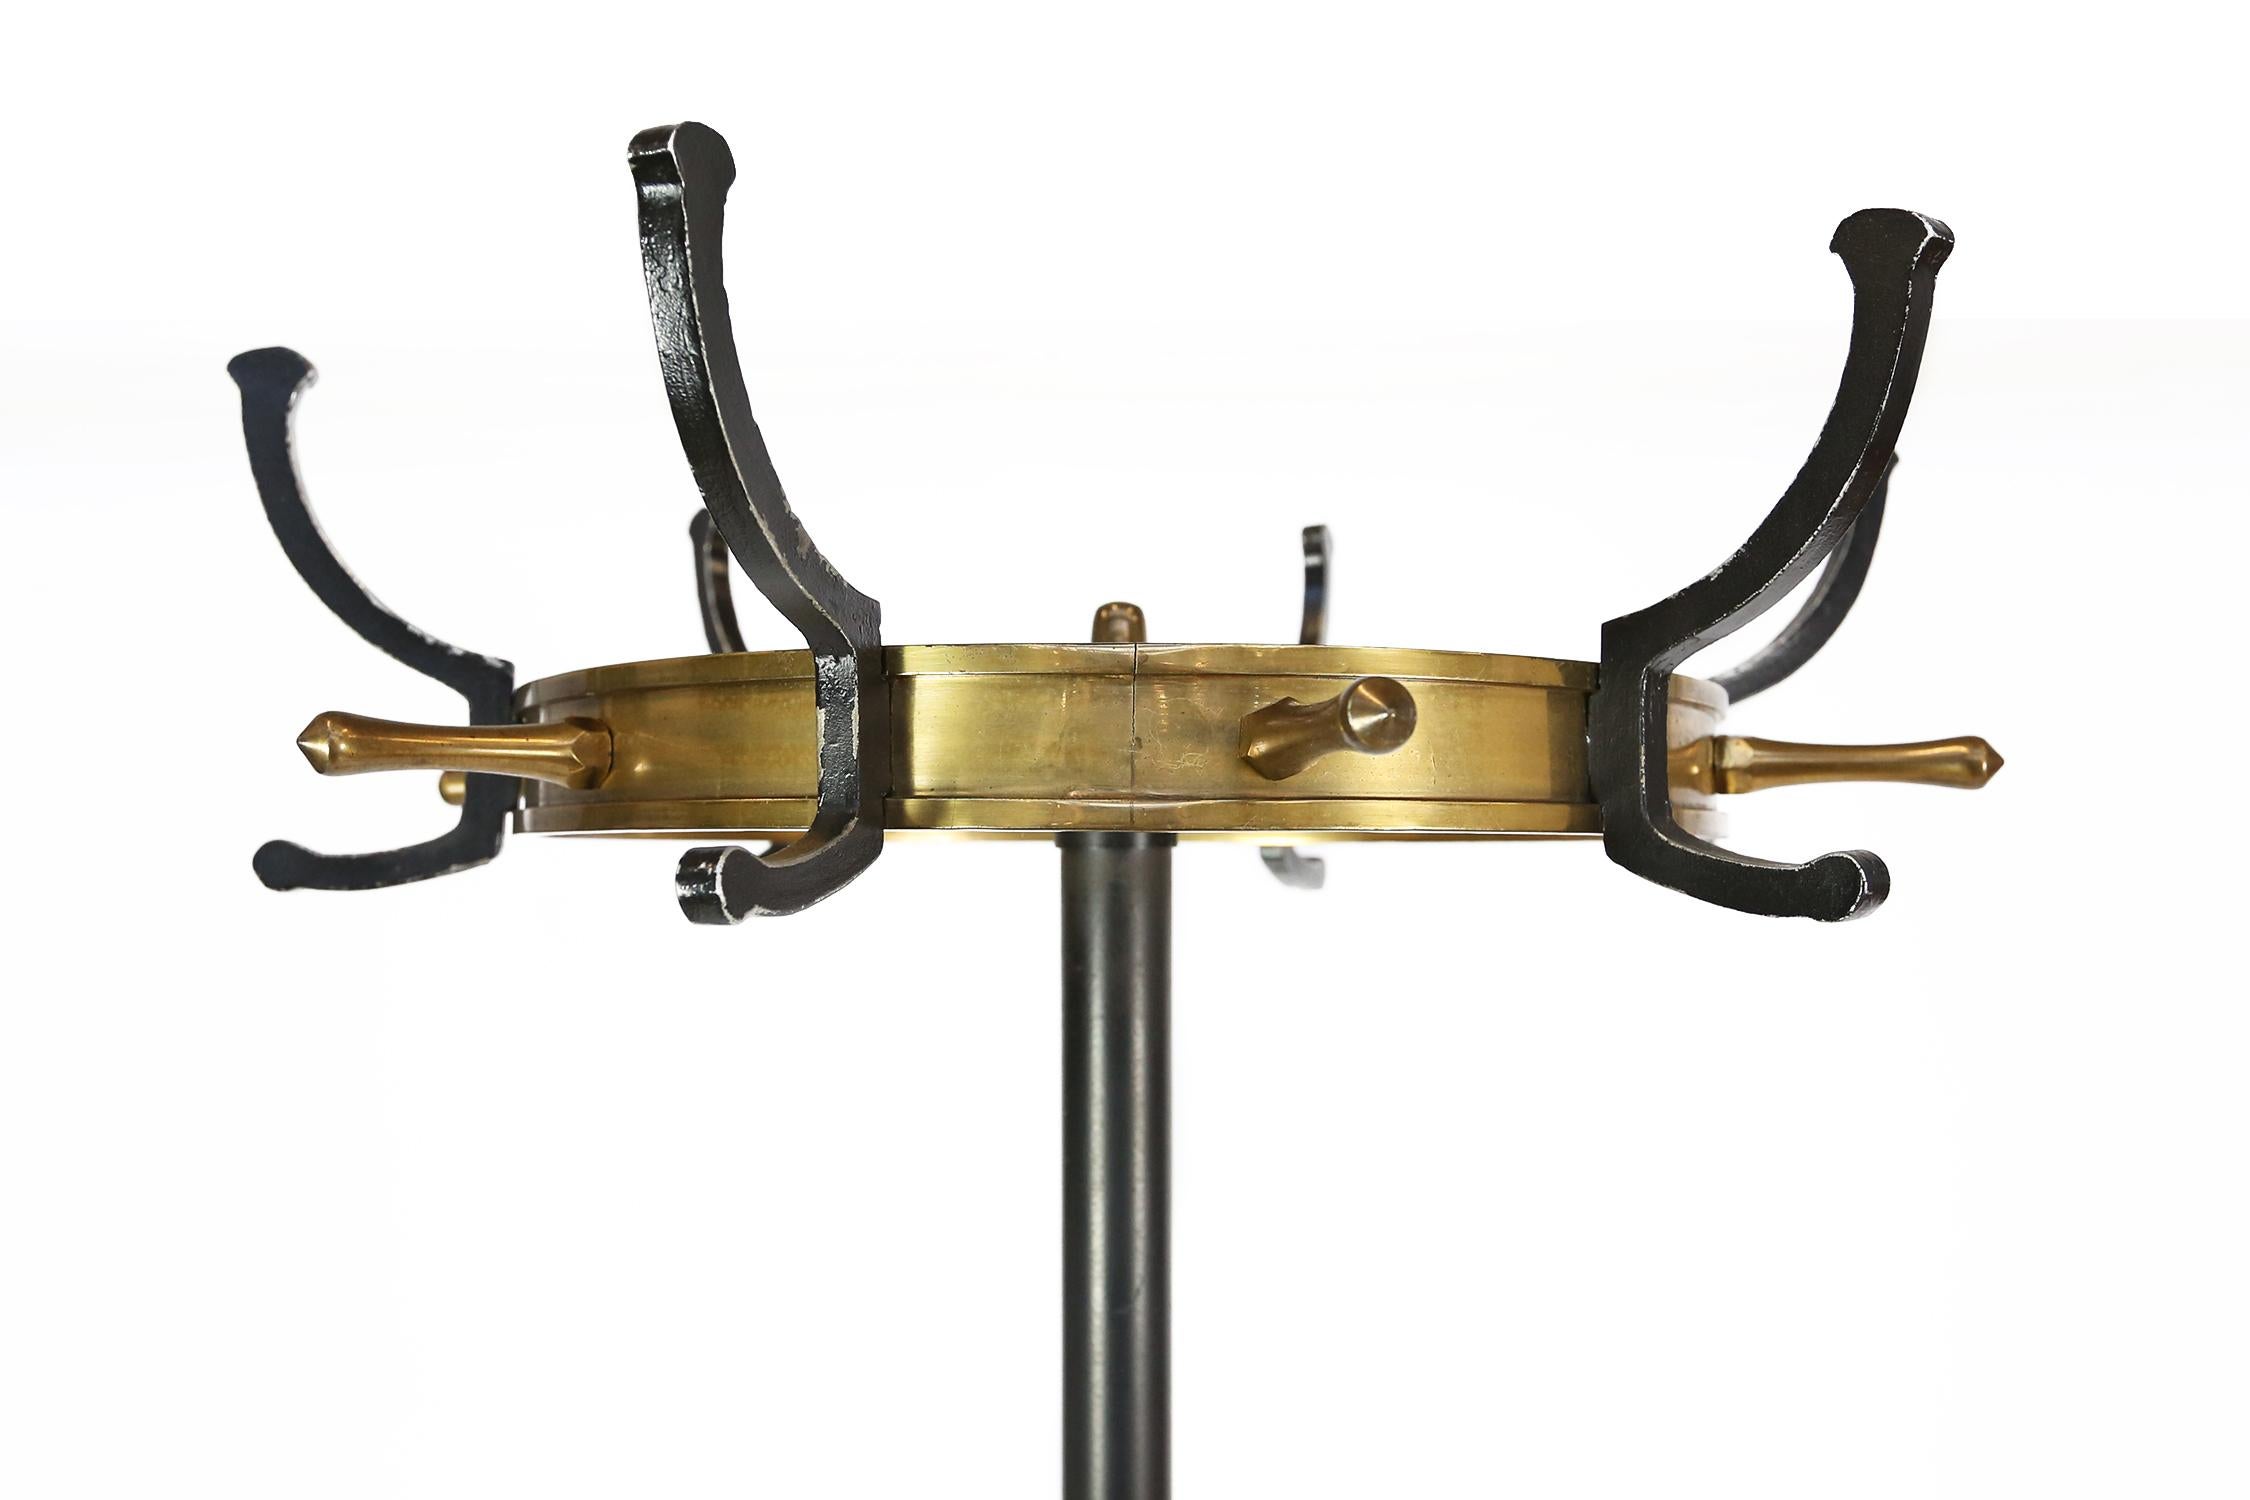 A luxuries coat rack designed by Jacques Adnet, manufactured in France, circa 1950.
This piece is made of high quality black lacquered metal with brass. The round foot has a 2 piece brass inner circle, and up the black stand are two curved umbrella